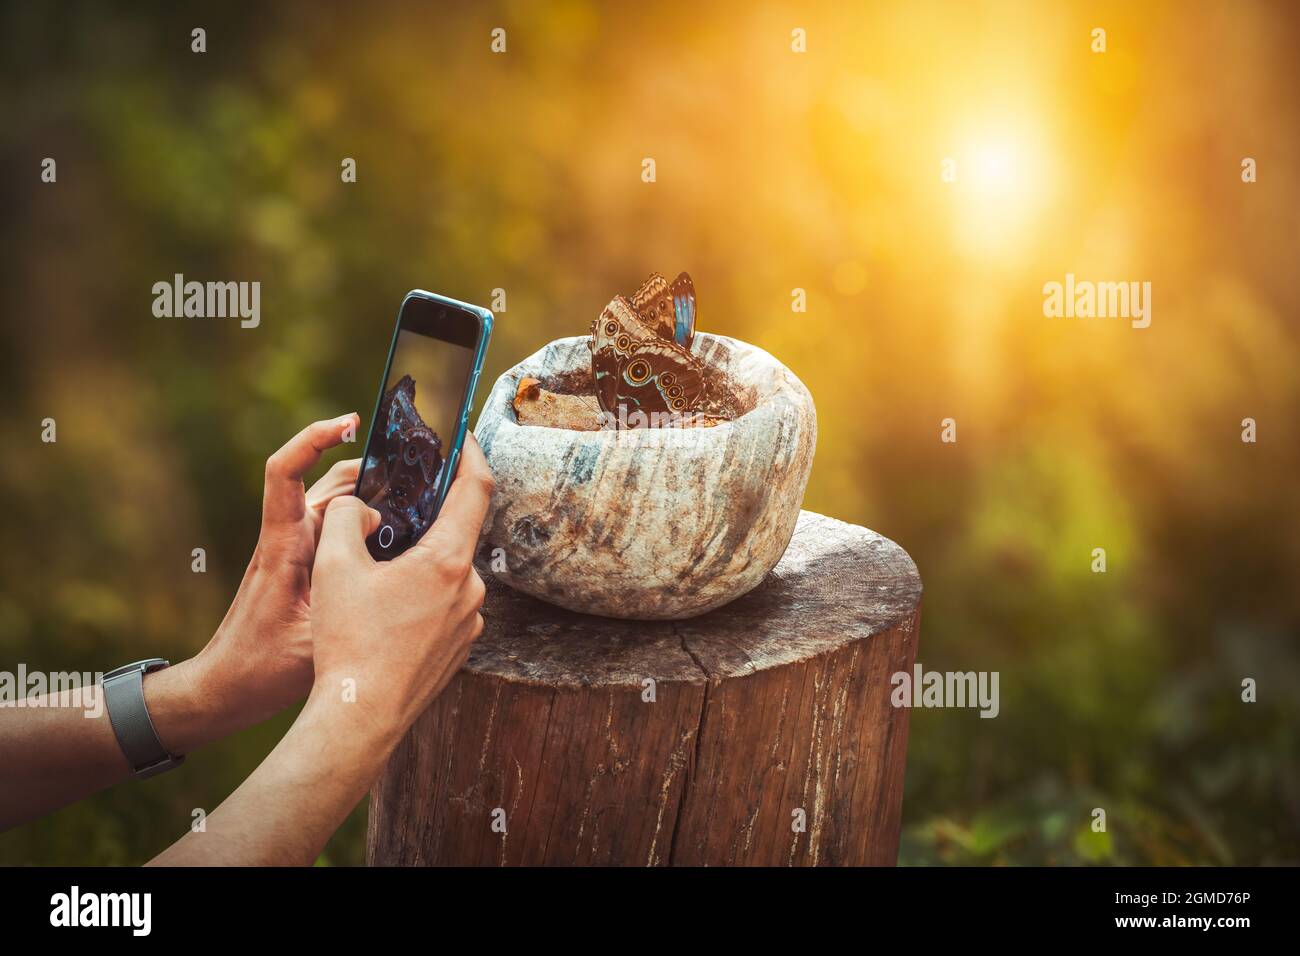 Man taking photo of two Morpho Peleides butterfly eating nectar of rotten fruits inside a stone mortar on a stump in garden. Stock Photo